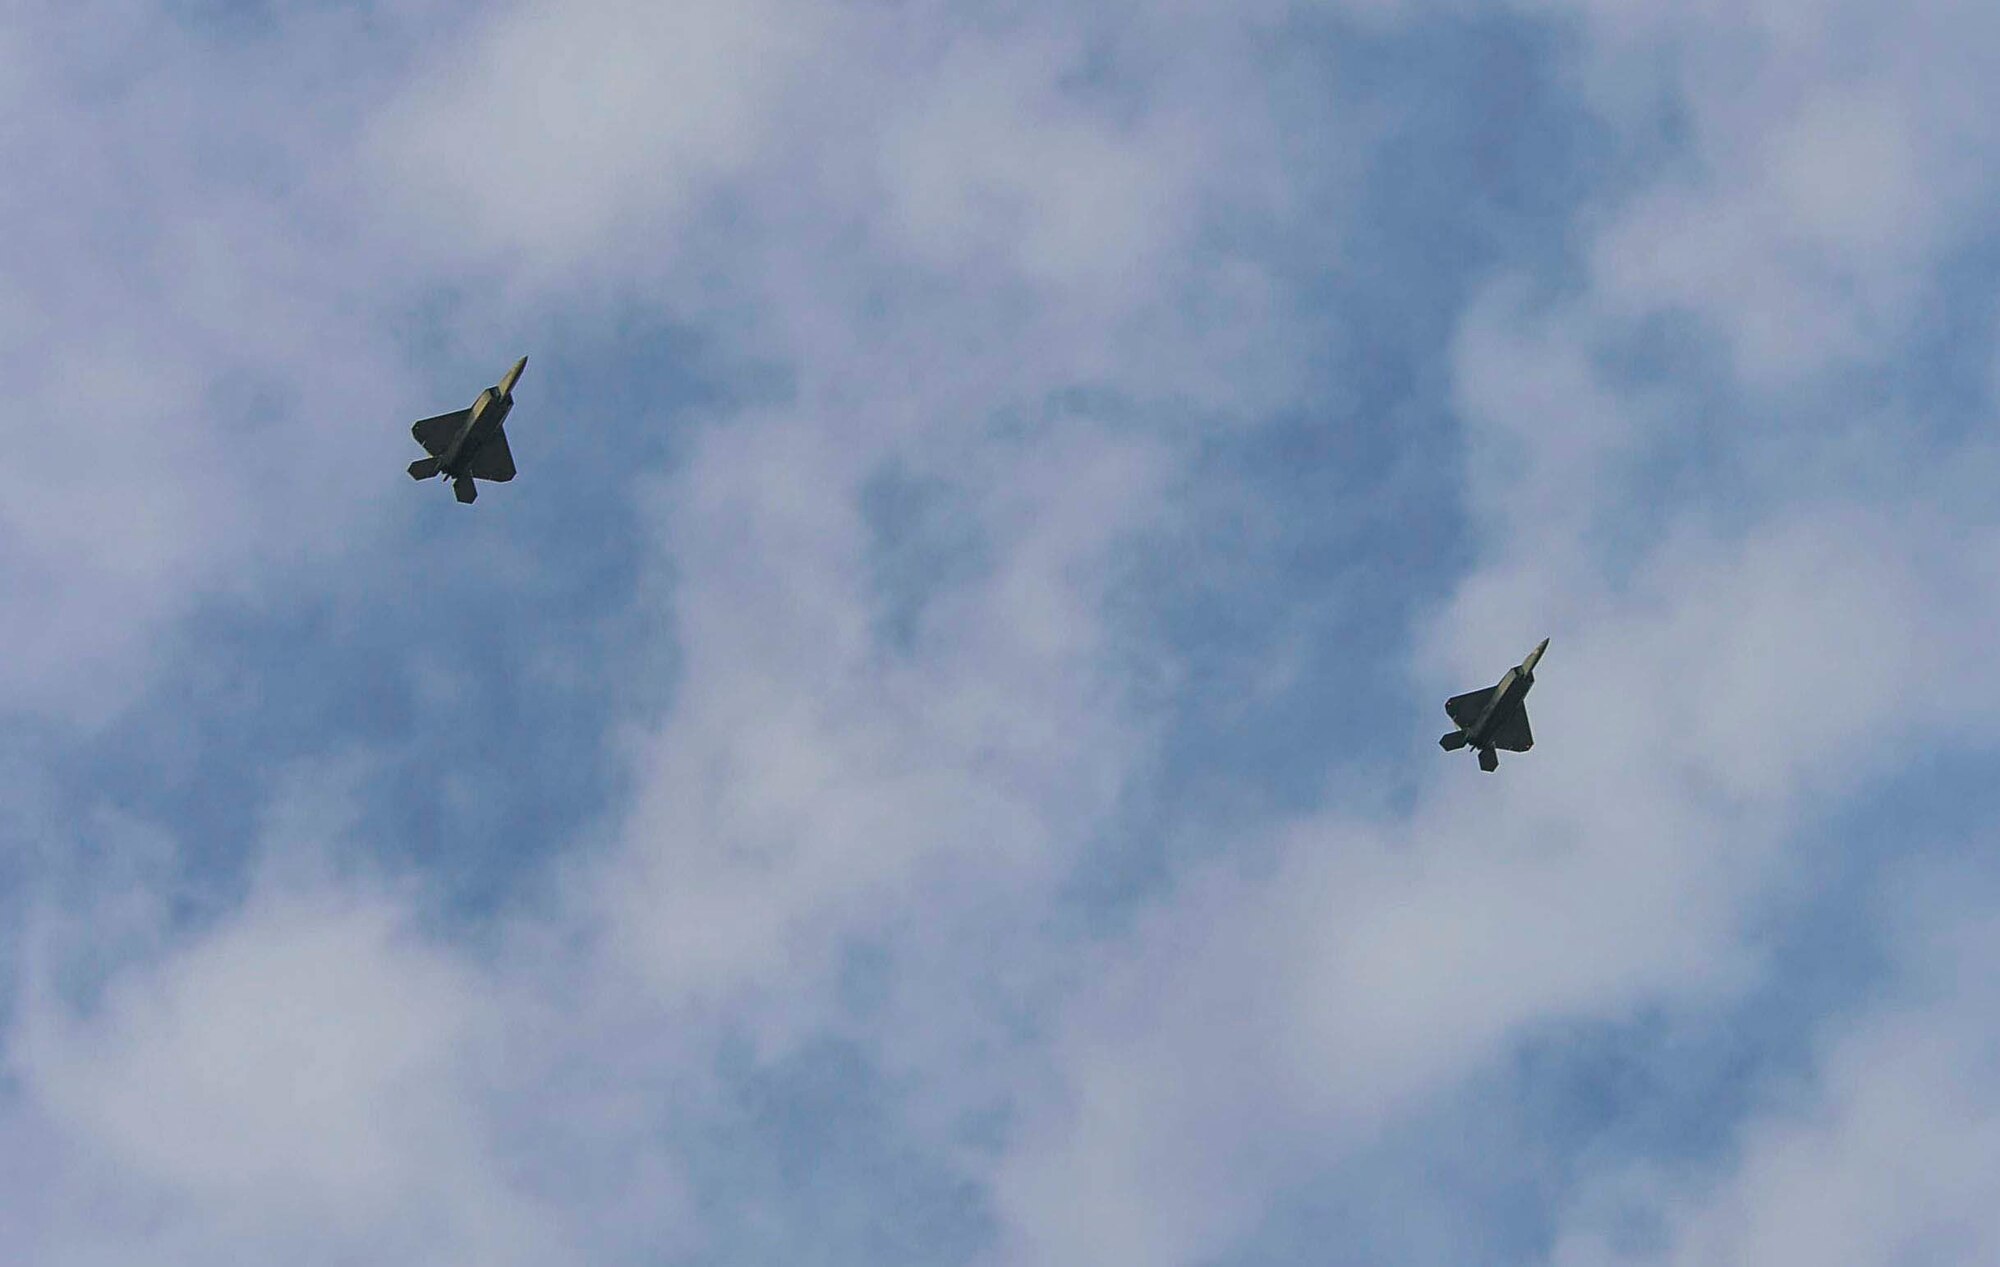 Two F-22 Raptors, from the F-22 Demonstration Team at Langley AFB, Va., fly into Santiago, Chile, to participate in 2016 International Air and Space Fair (FIDAE), on March 27, 2016.  Airmen from around the U.S. are scheduled to participate in a variety of activities during the week-long air show that includes aerial demonstrations, interaction with the local community, and subject matter expert exchanges with the Chilean air force. (U.S. Air Force photo by Tech. Sgt. Heather Redman/Released)